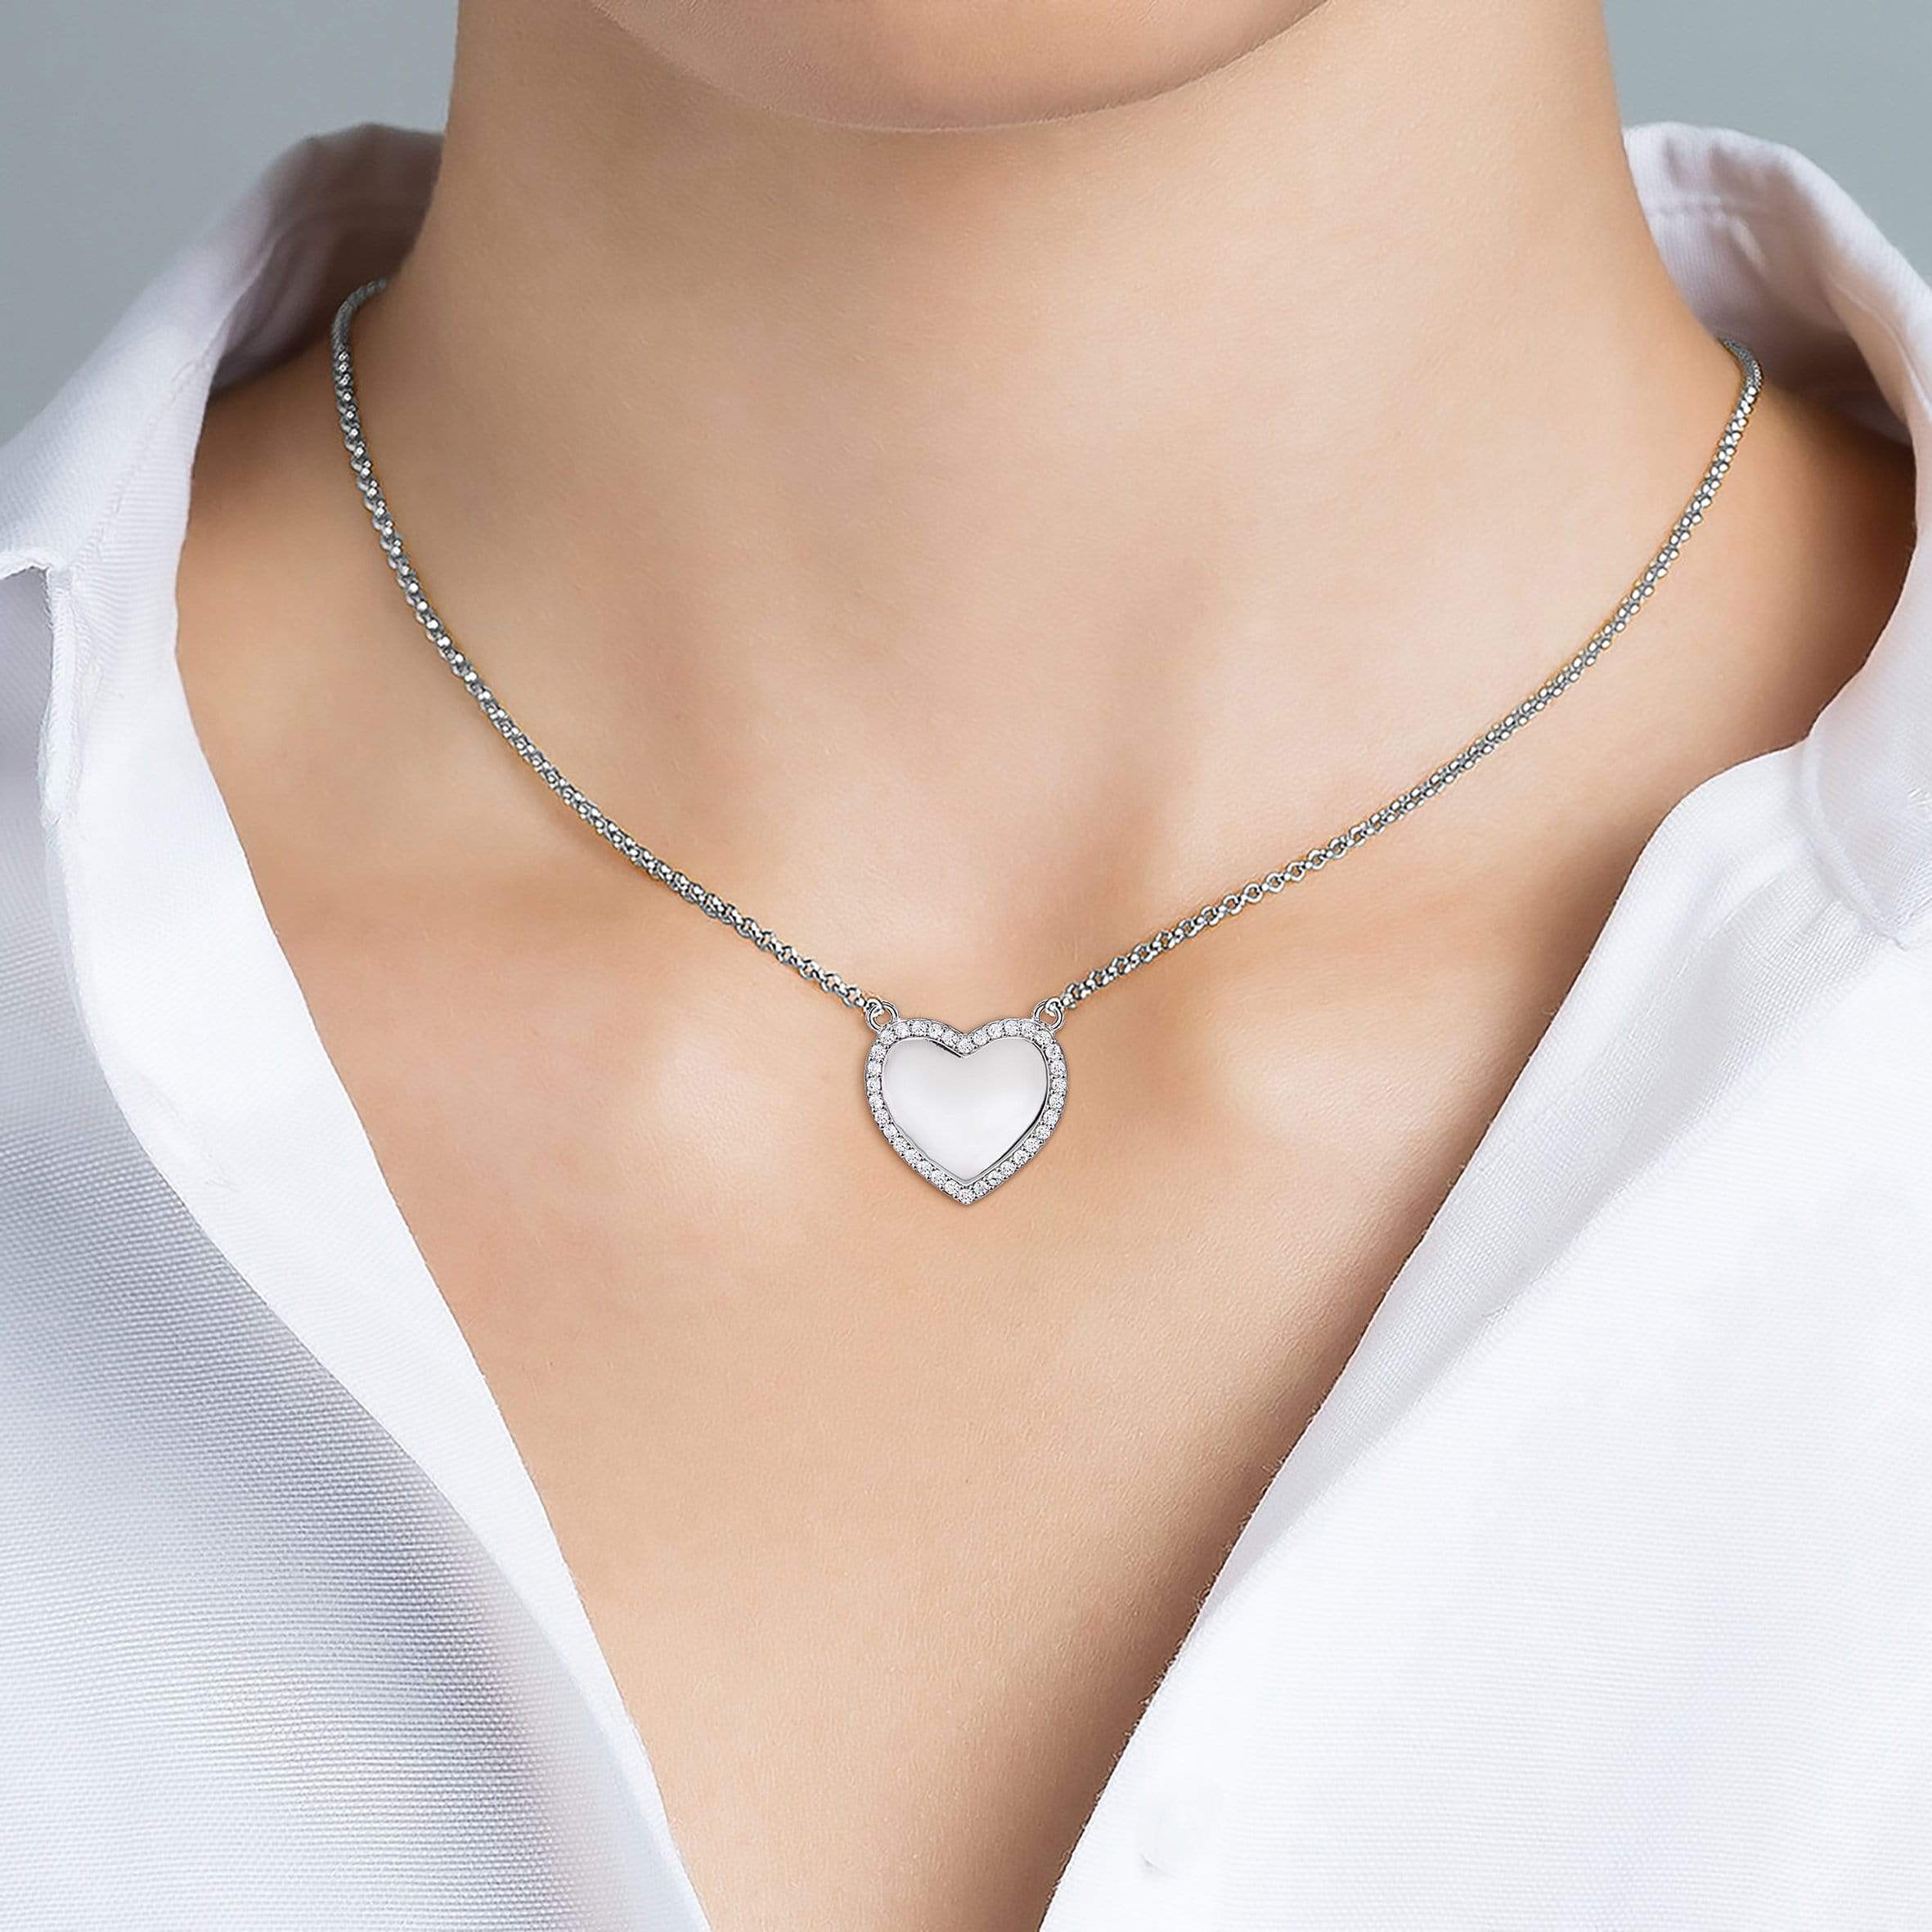 Lynora jewellery Necklace Sterling Silver / Clear Embrace Heart Necklace